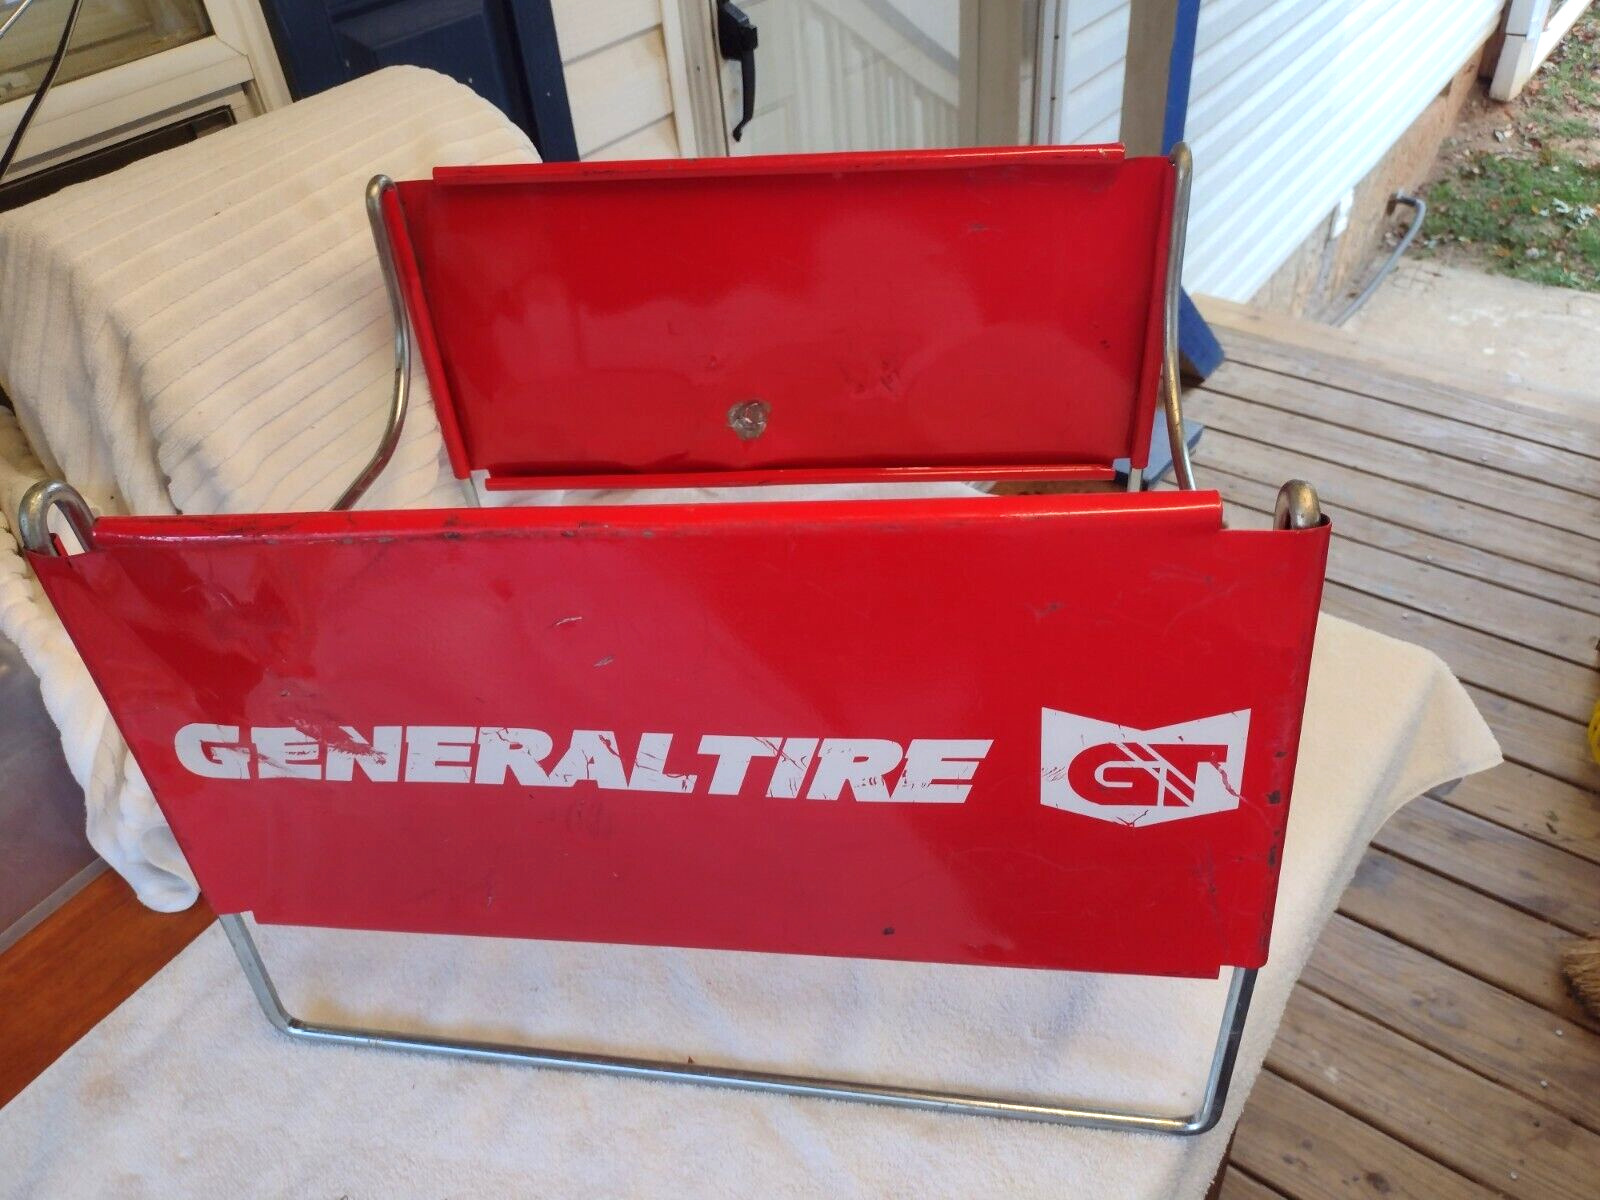 ALL METAL  GENERAL TIRE  DISPLAY ADVERTISEMENT SIGN